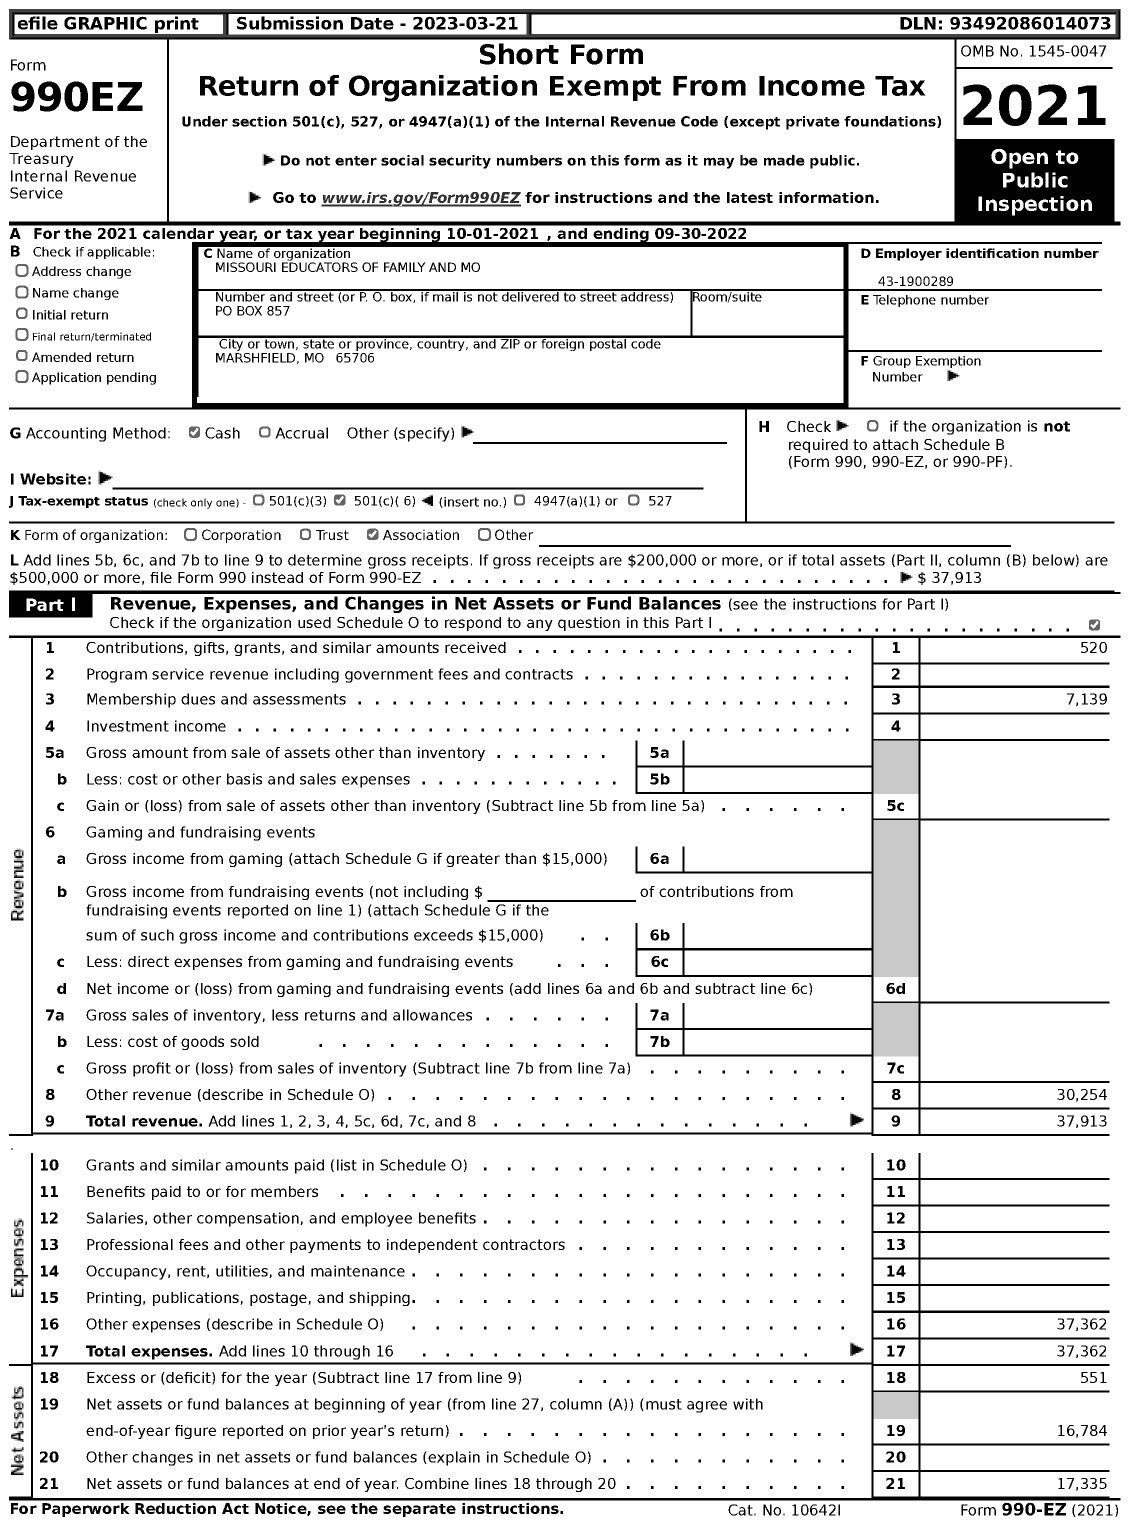 Image of first page of 2021 Form 990EZ for Missouri Educators of Family and Mo